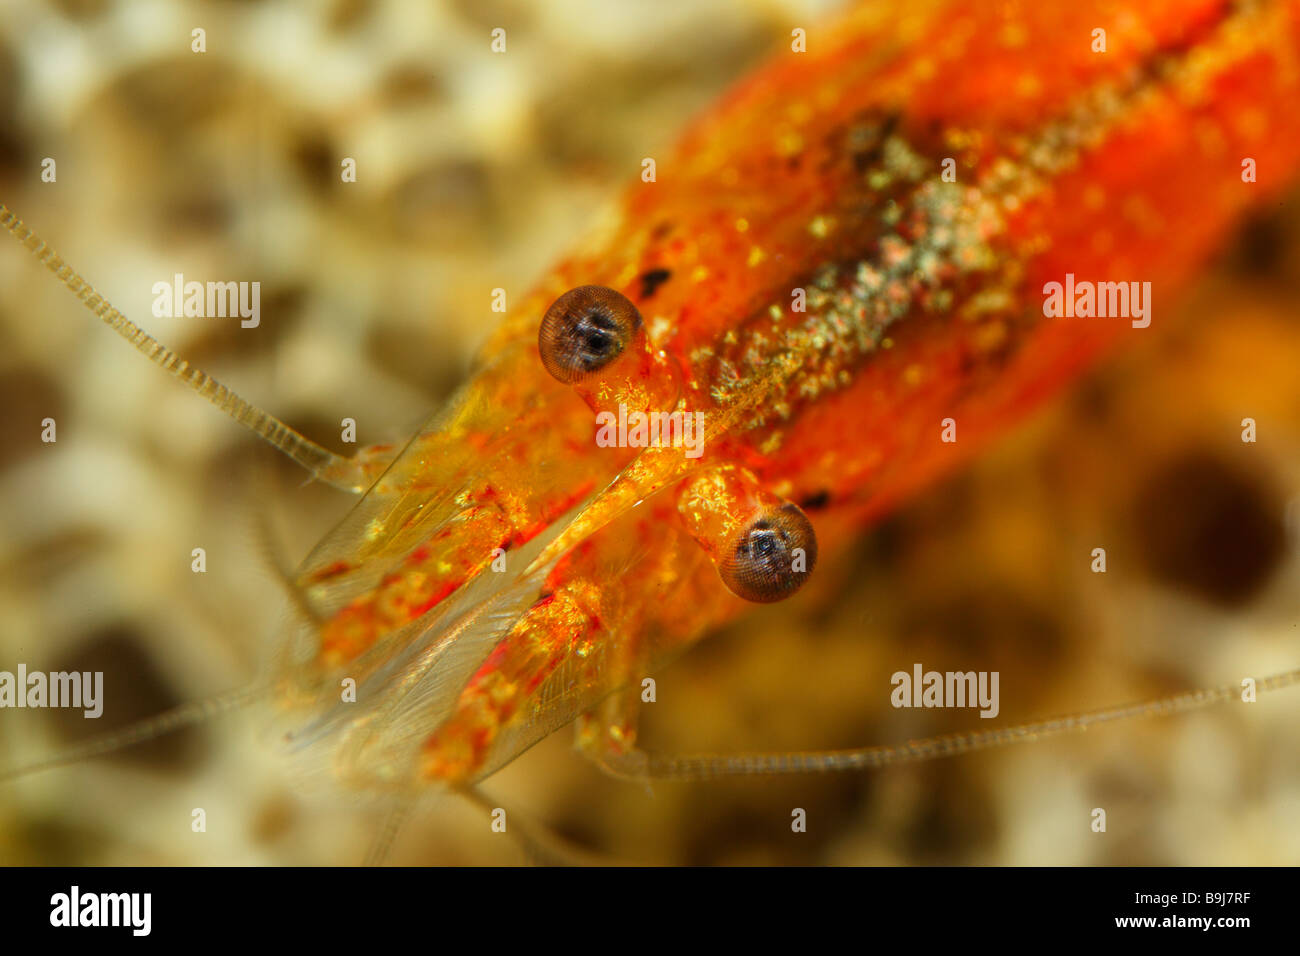 Mangrove Hairy-handed Prawn (Caridina propinqua) from Indonesia, close-up of the head, fresh water Stock Photo